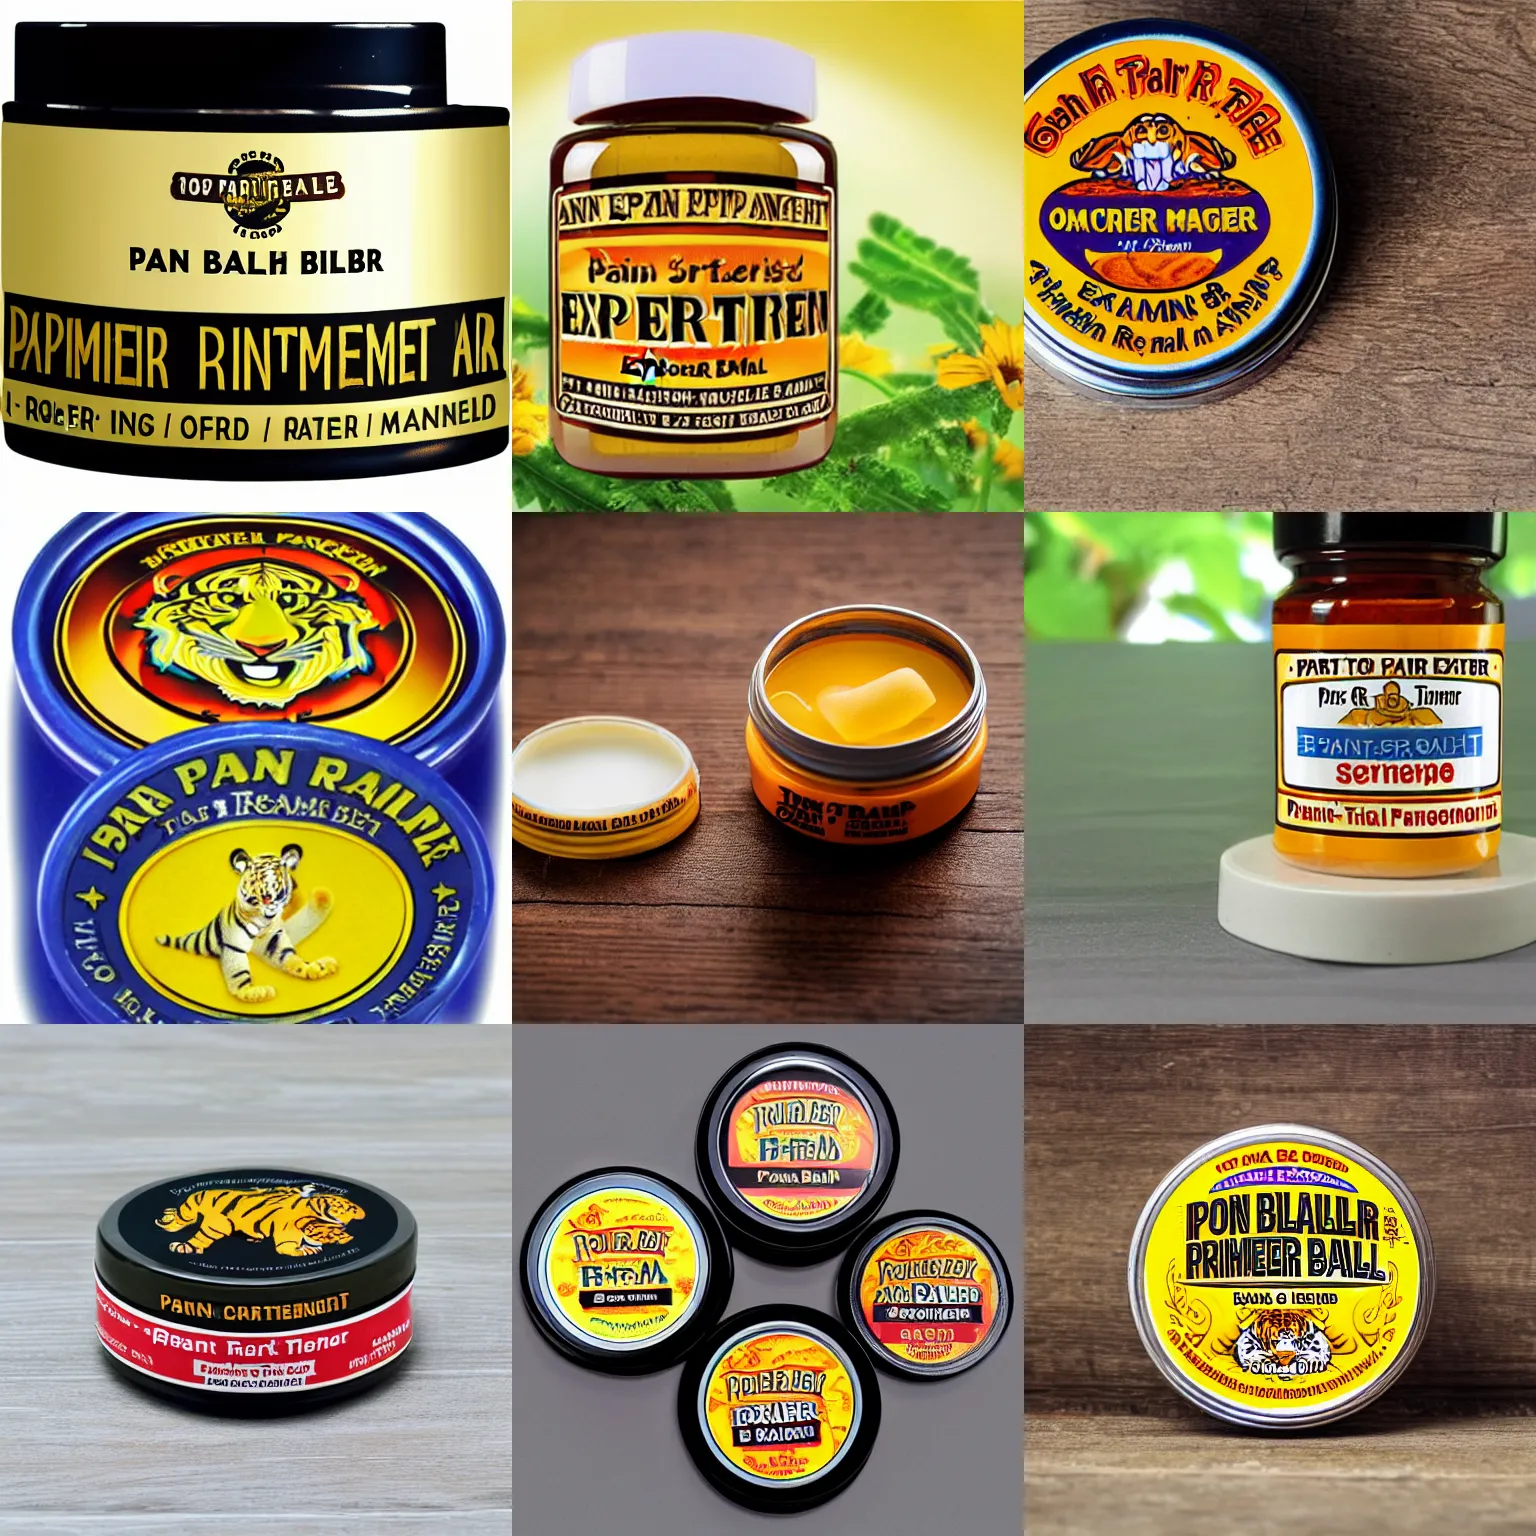 Prompt: a pain relieving ointment tiger balm extra strength for the relief of aching muscles